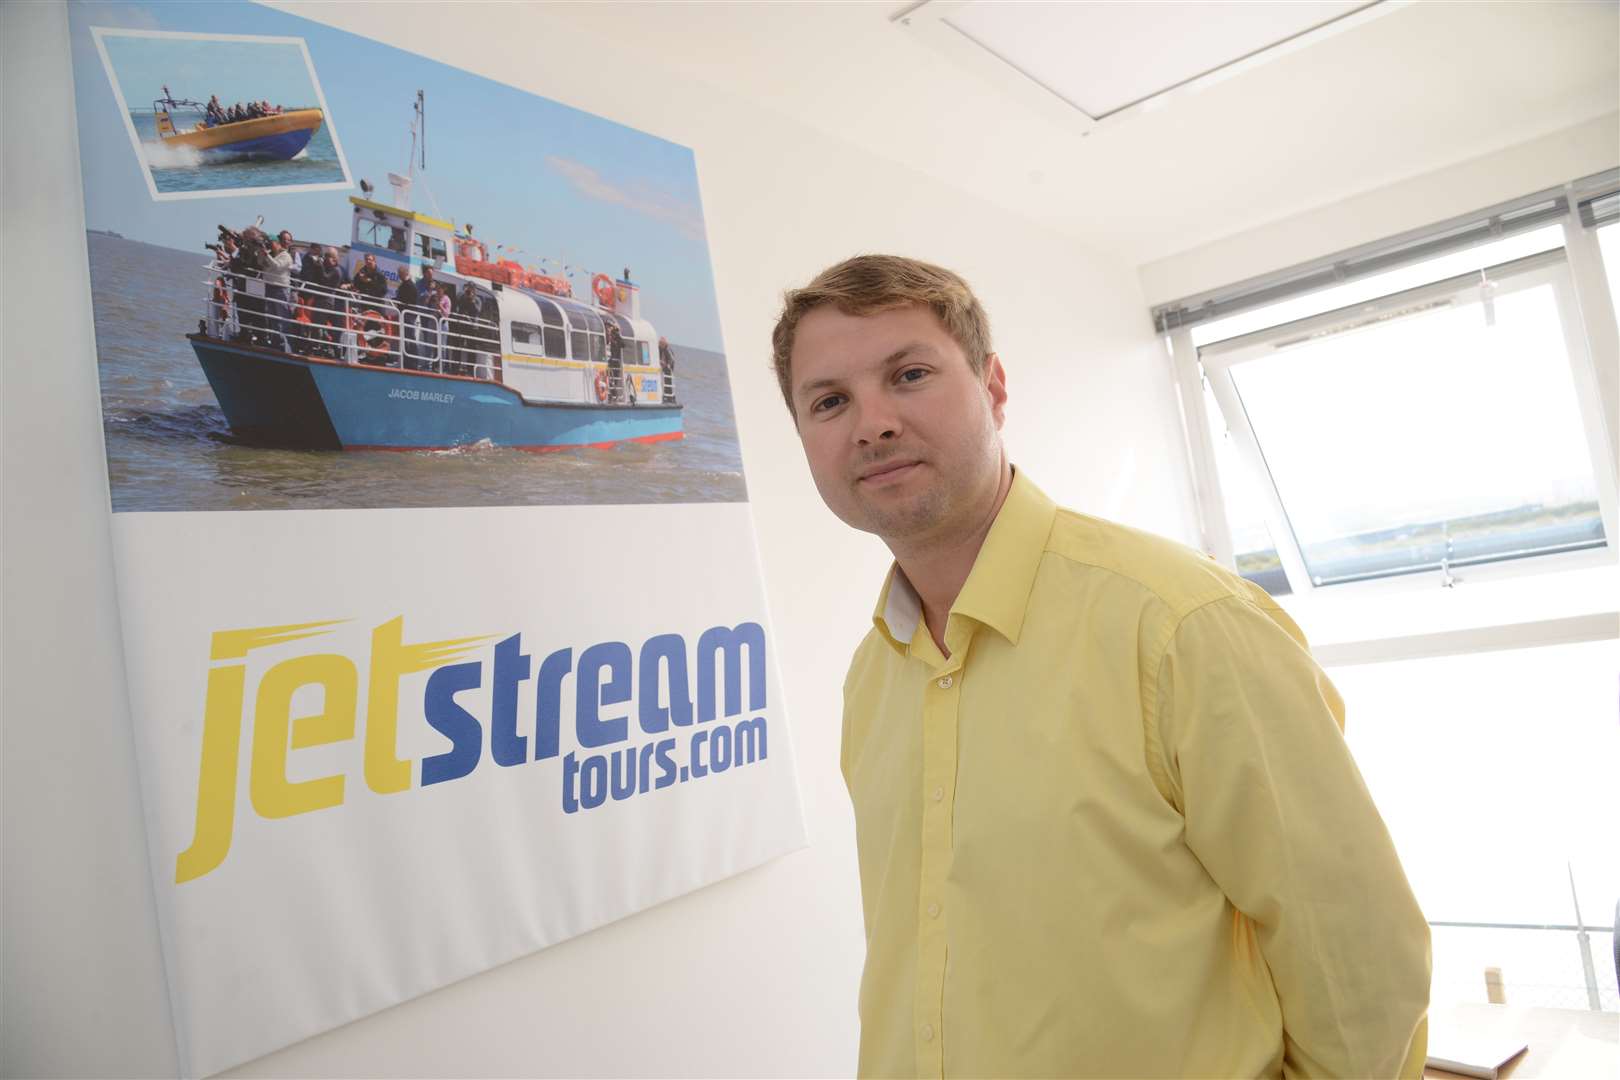 Richard Bain of Jetstream Tours, which has one of the closest offices to the railway line. Picture: Gary Browne